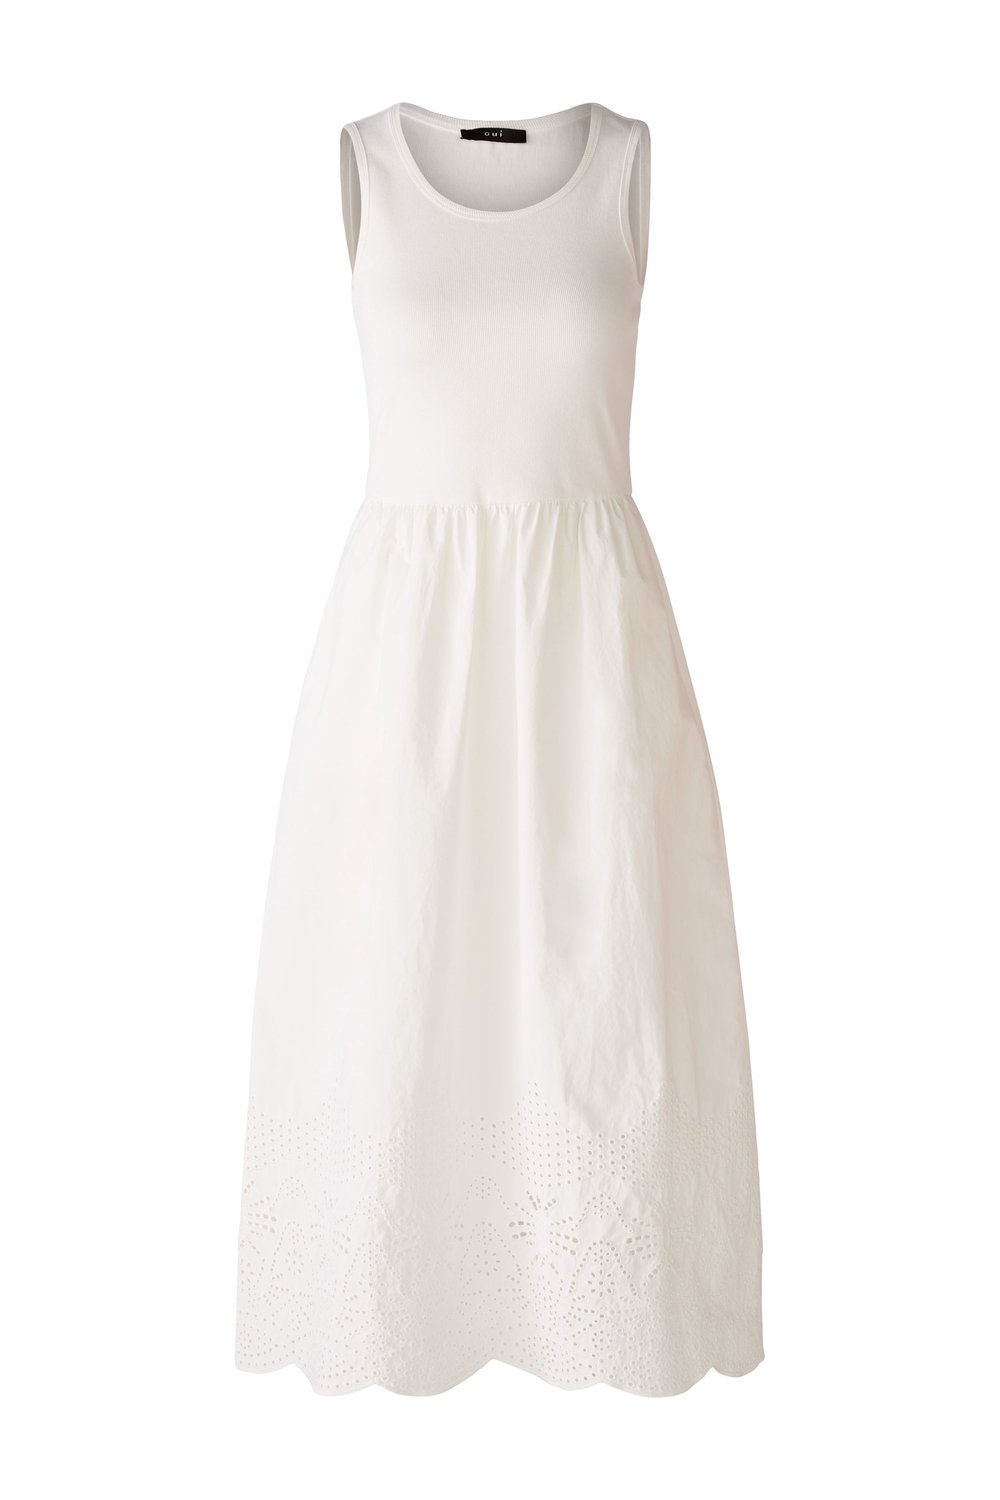 Oui Cotton Jersey & Broderie Anglaise Dress